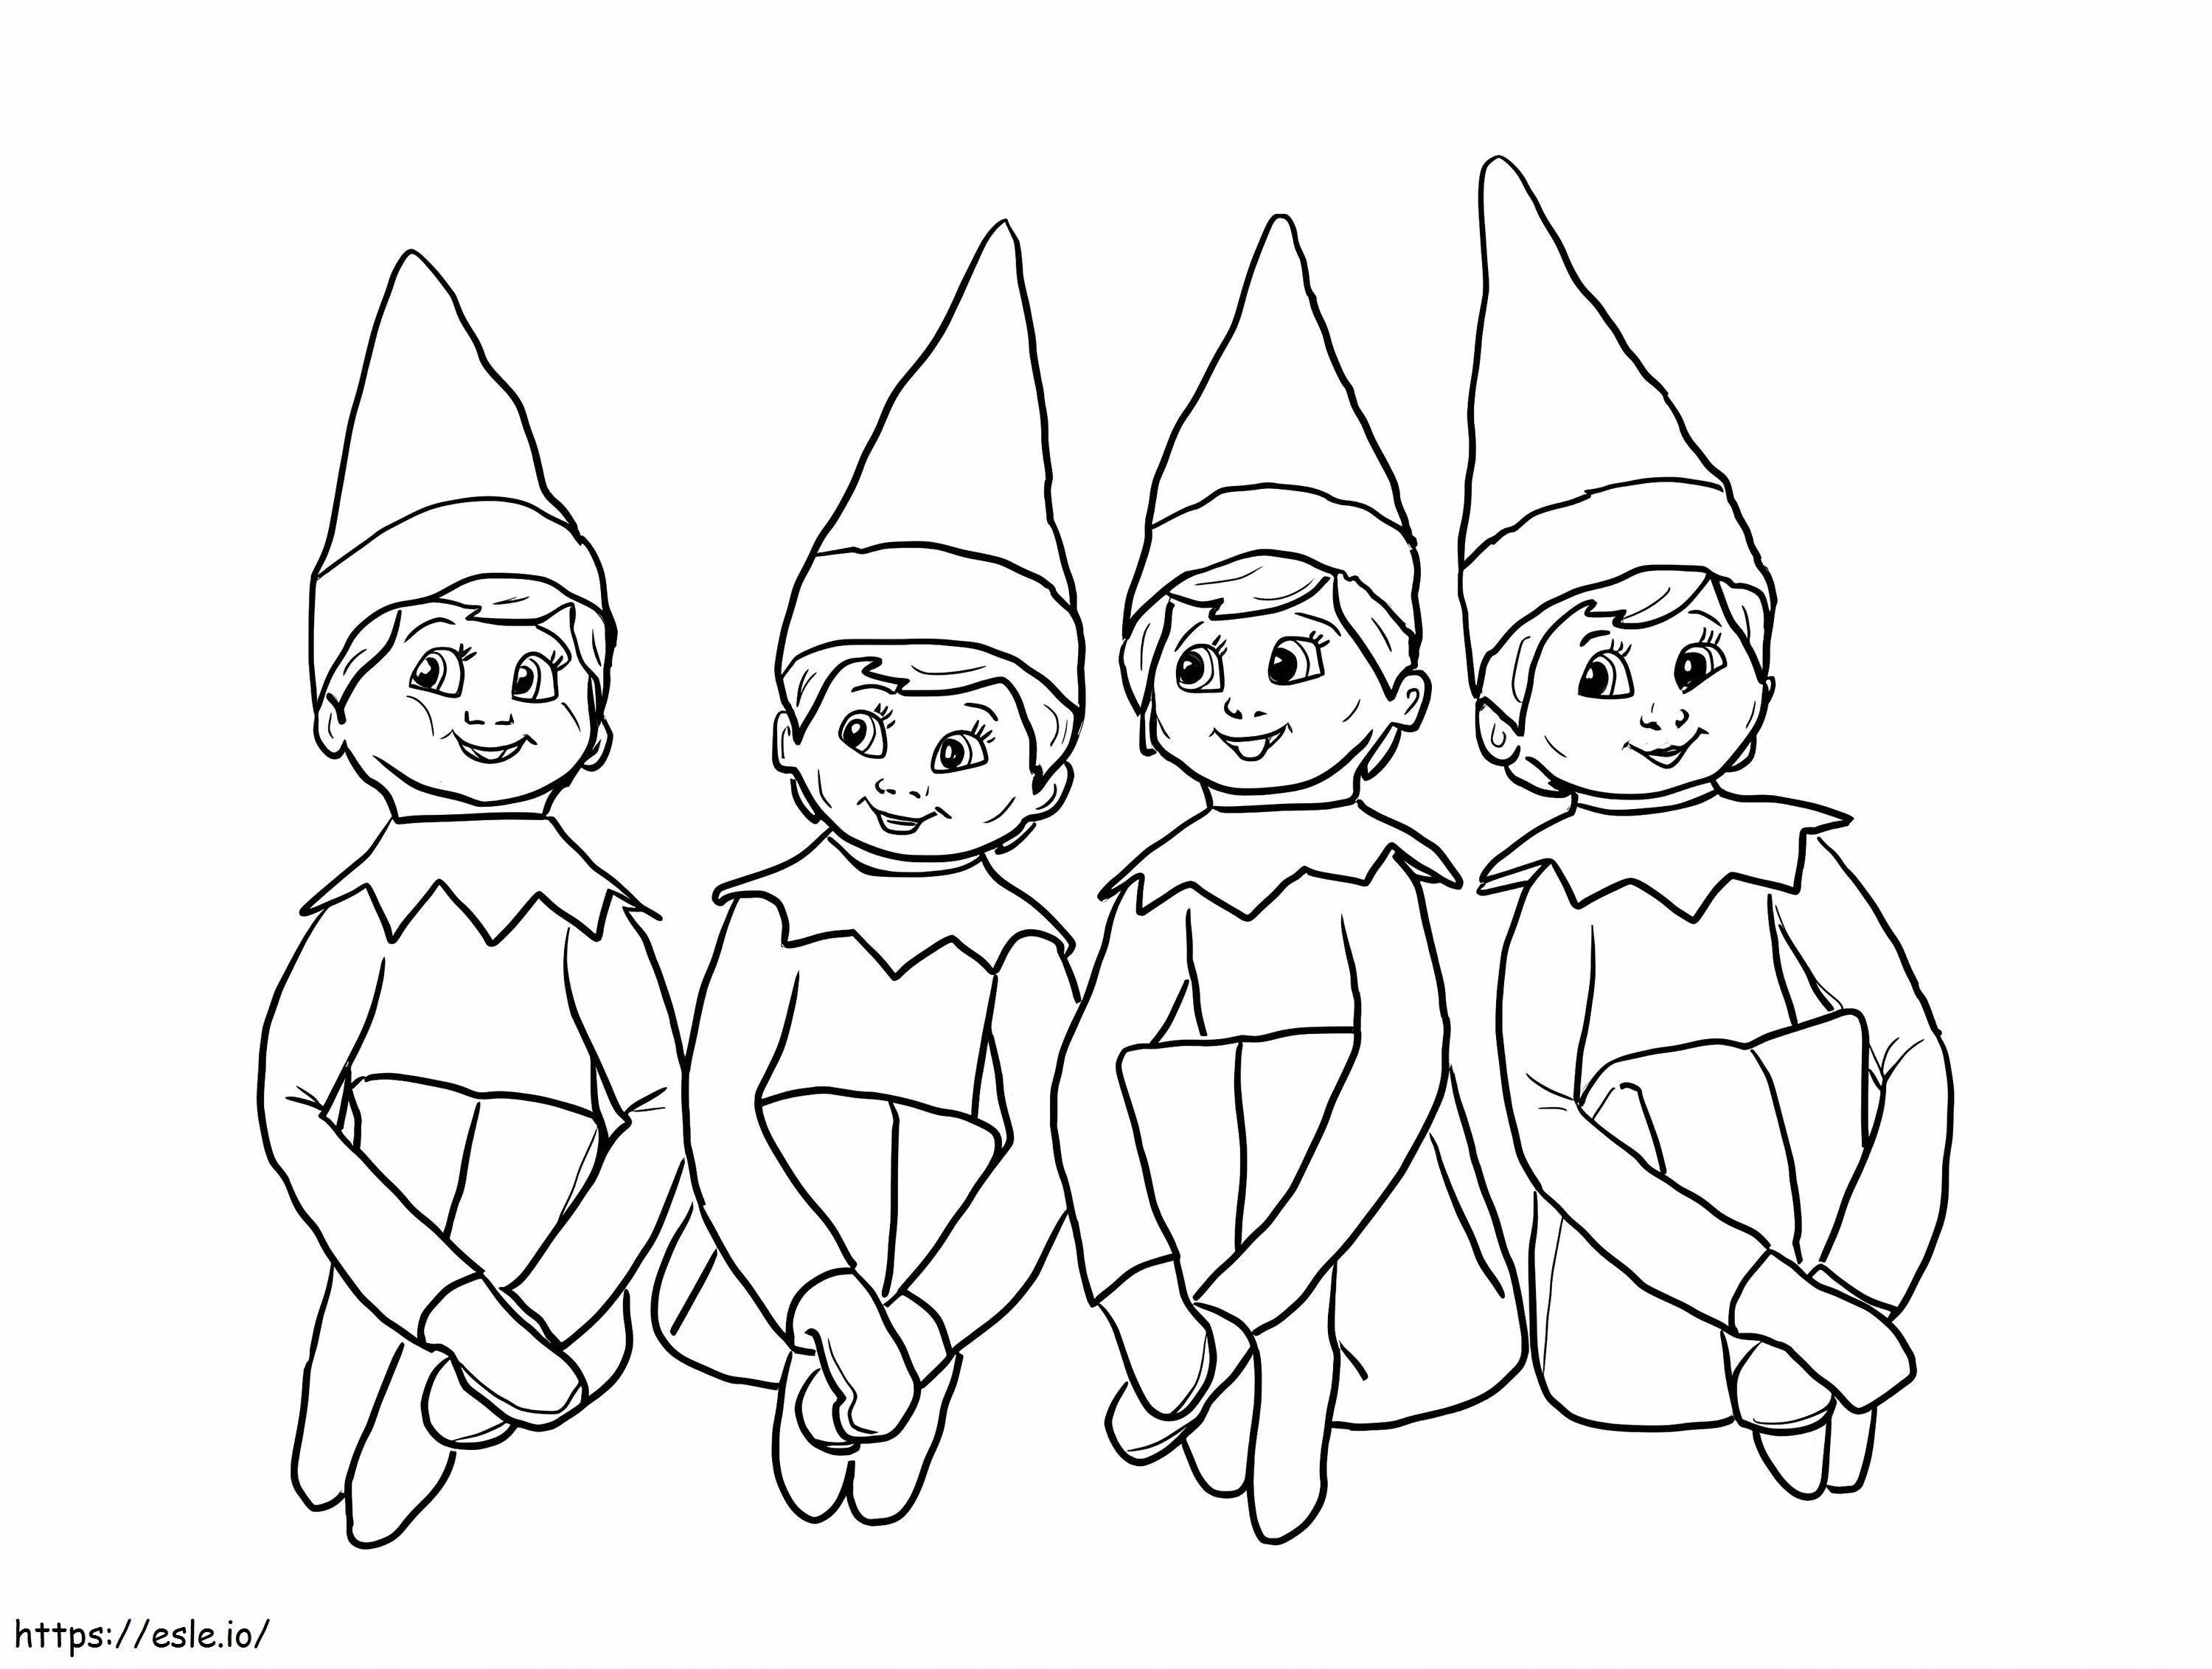 Elves On The Shelf coloring page